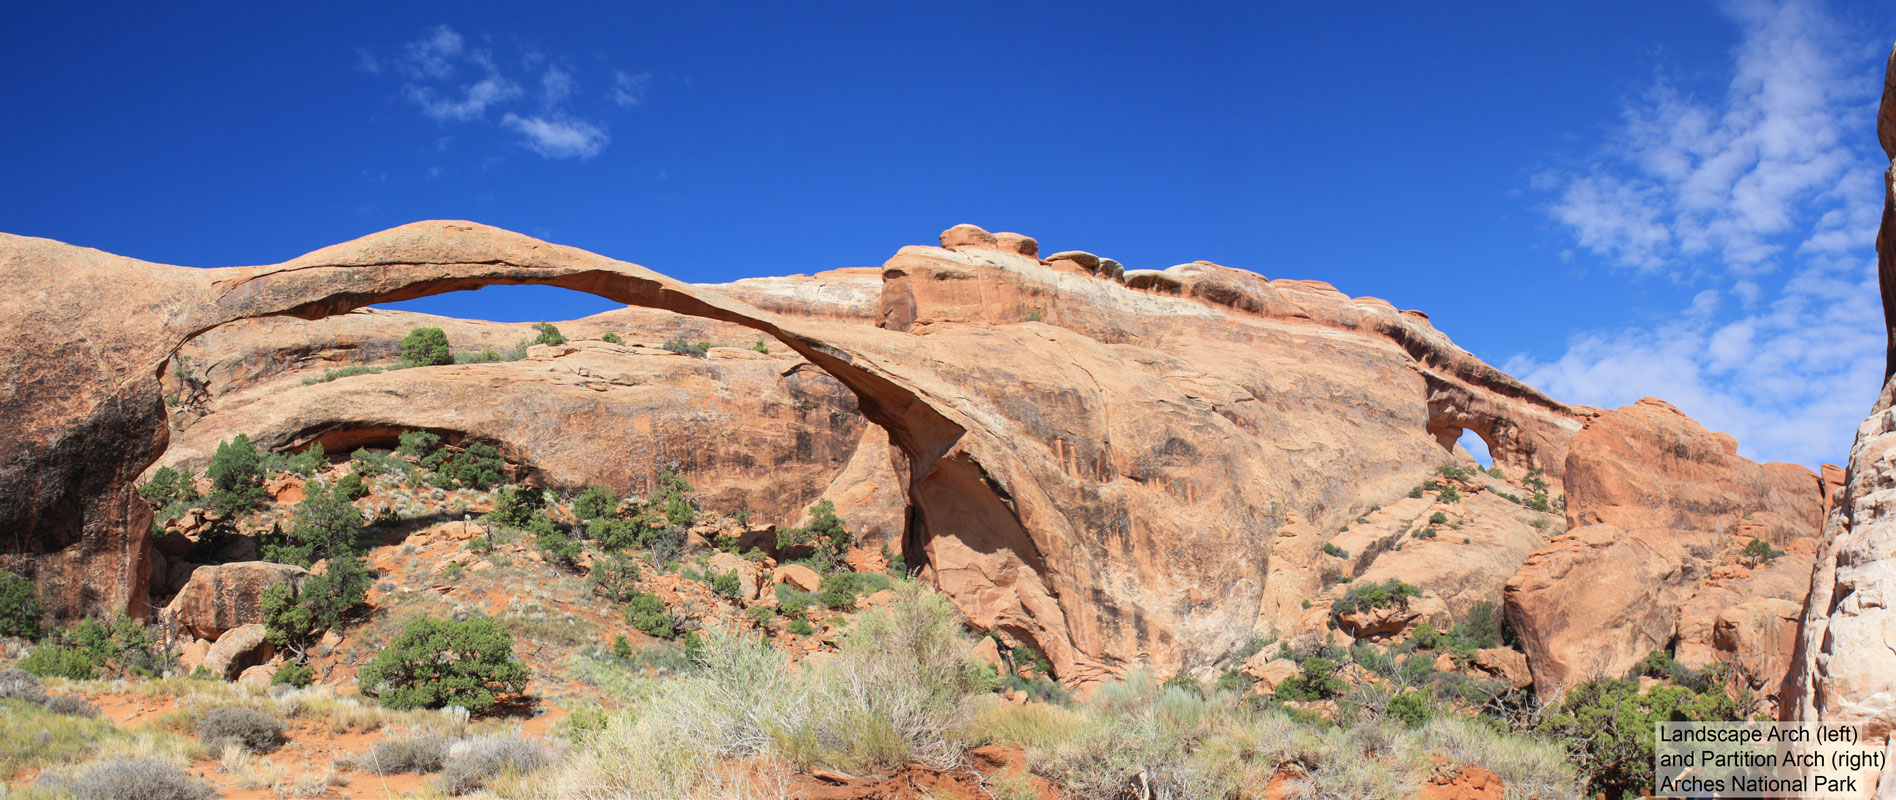 Landscape Arch (left) and Partition Arch (right)